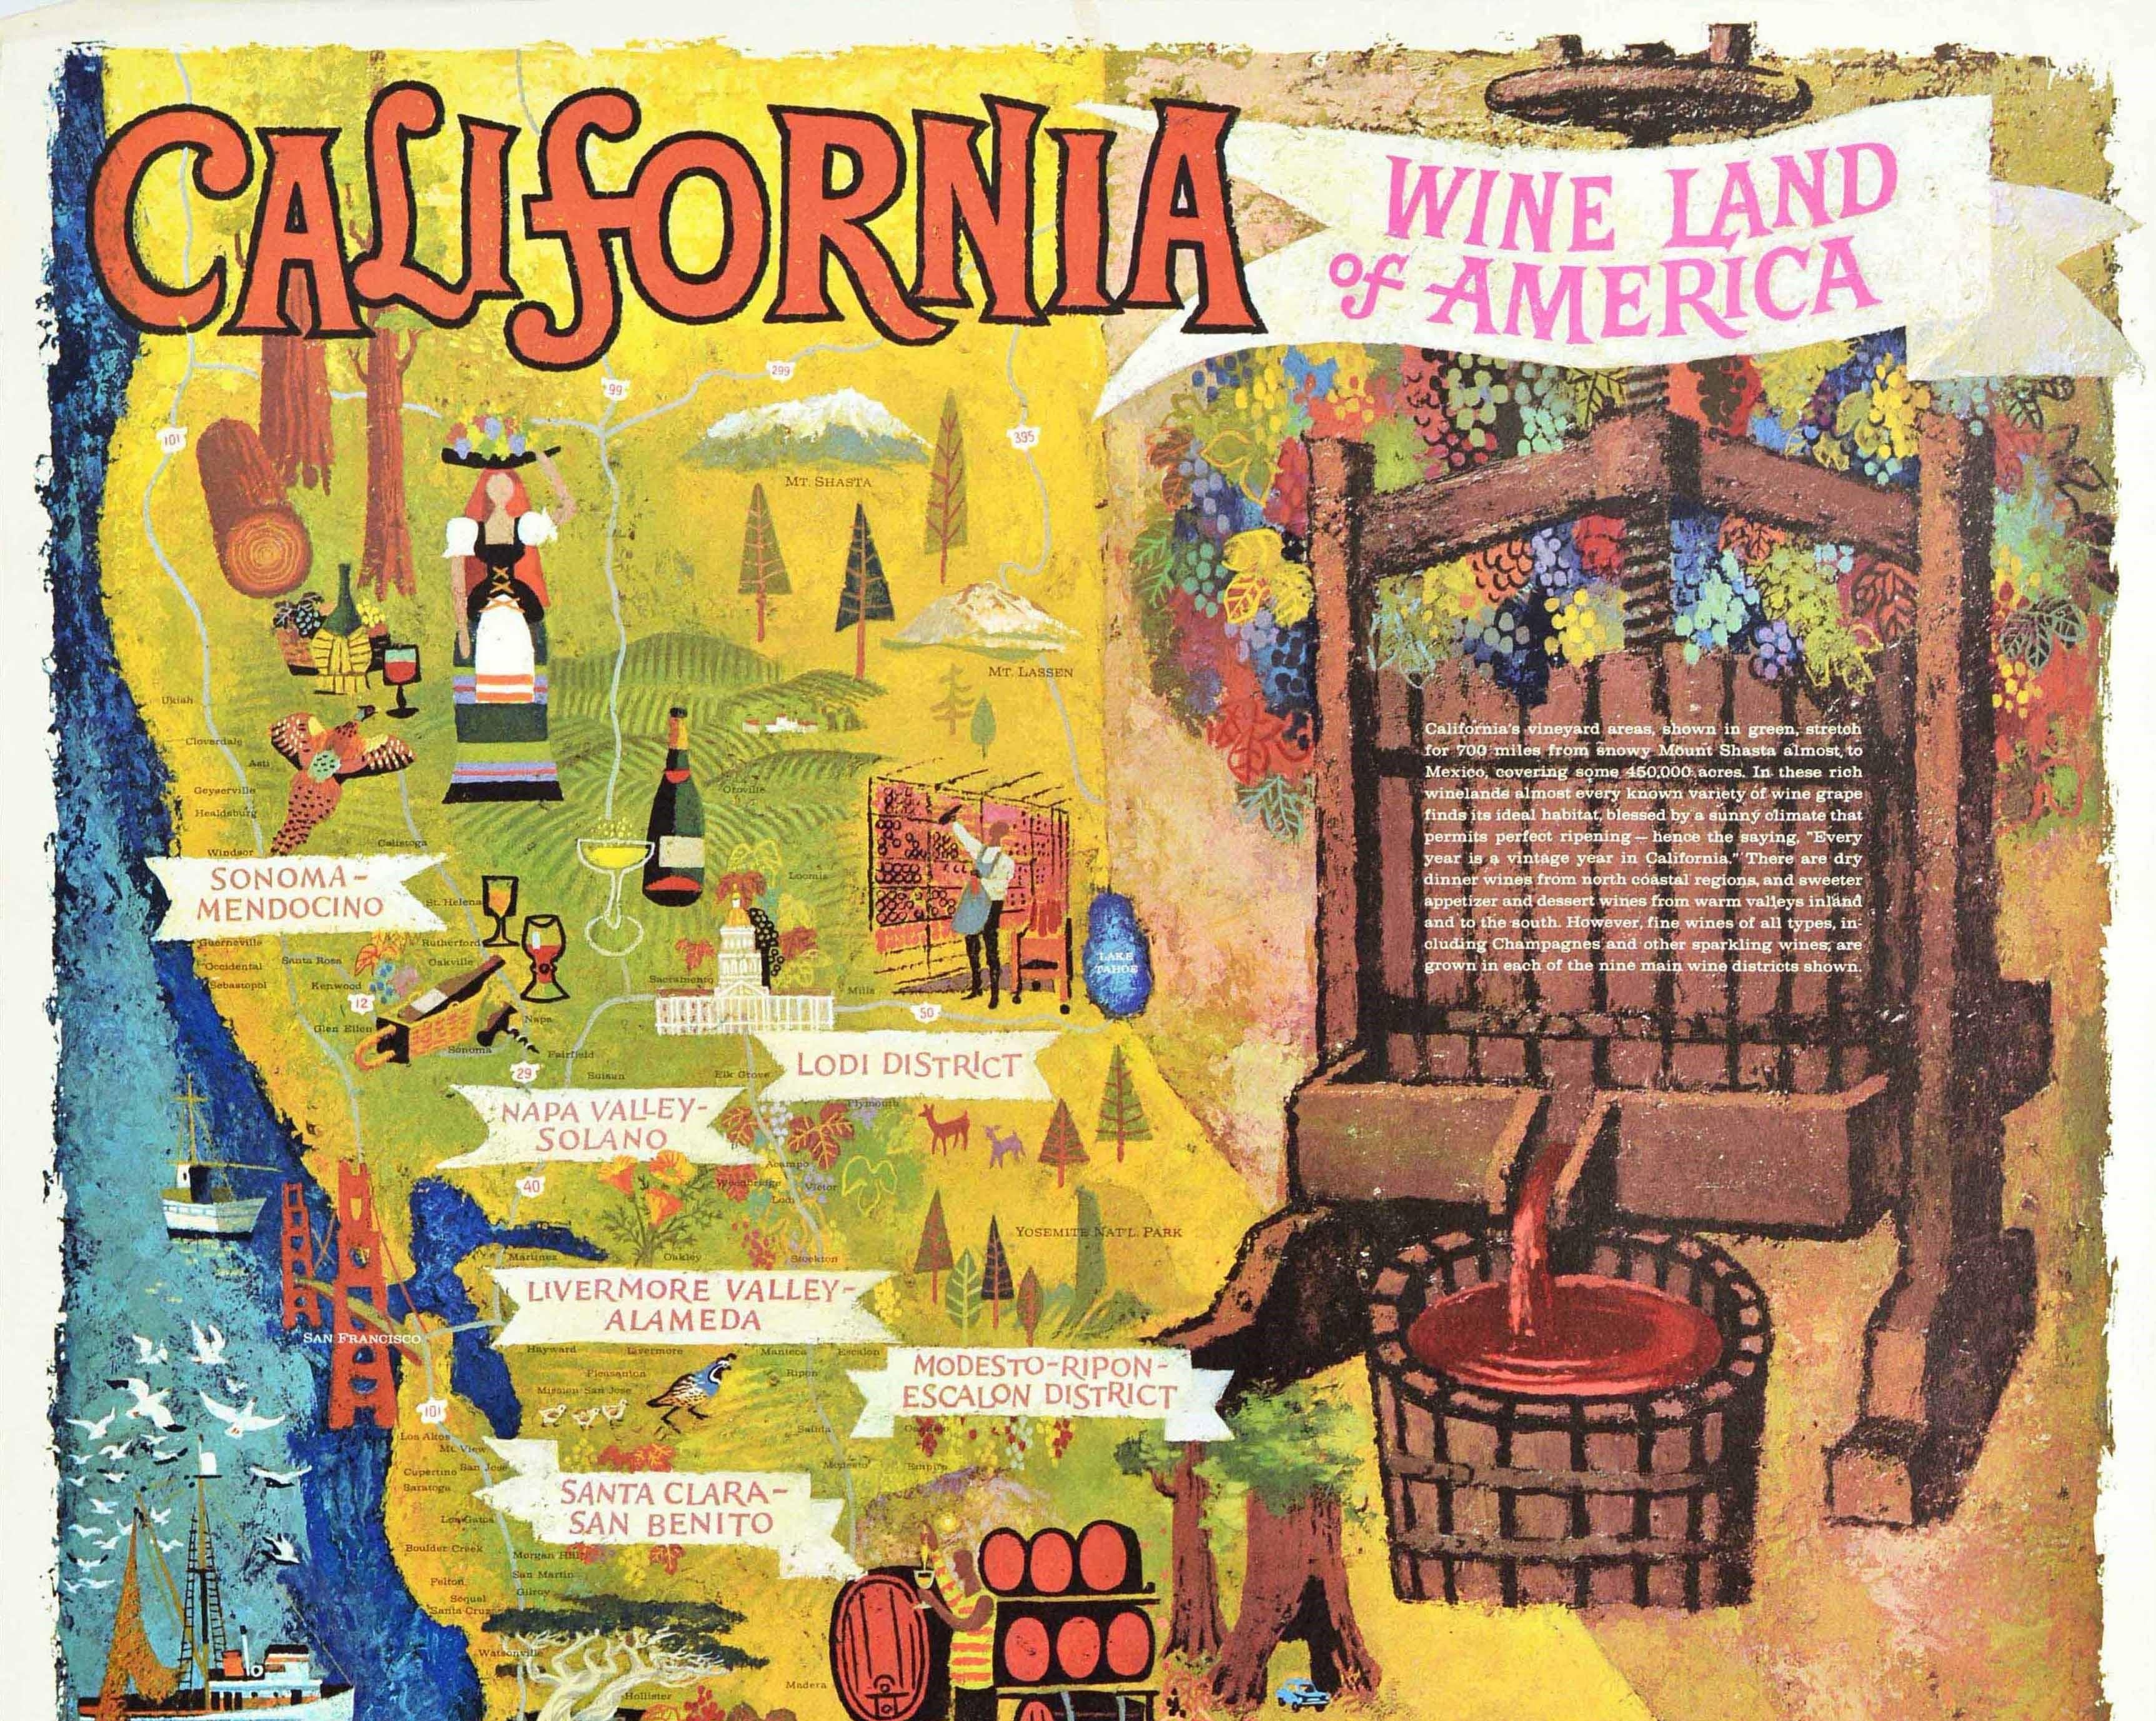 Original vintage travel poster for California Wine Land of America featuring a map with the areas and districts marked on banners and colourful illustrations including vineyards and winemakers, wine barrels and bottles, notable locations and